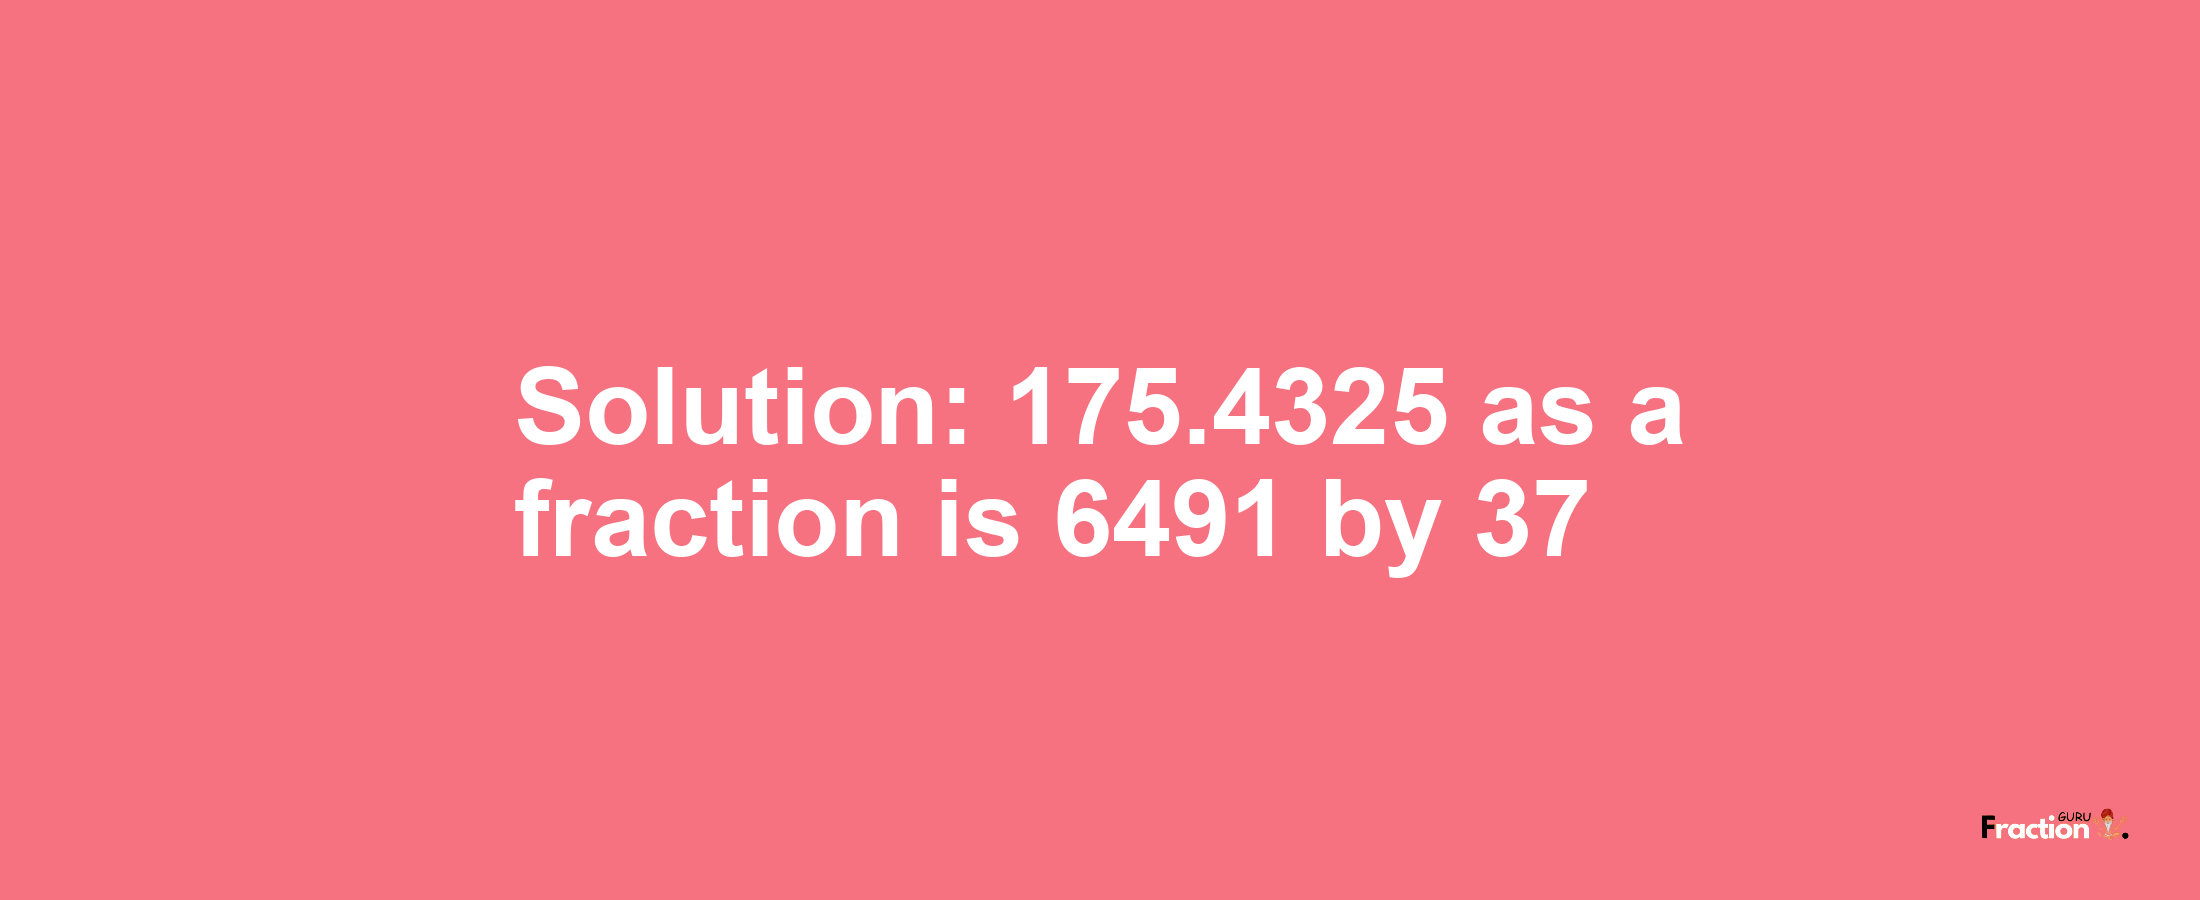 Solution:175.4325 as a fraction is 6491/37